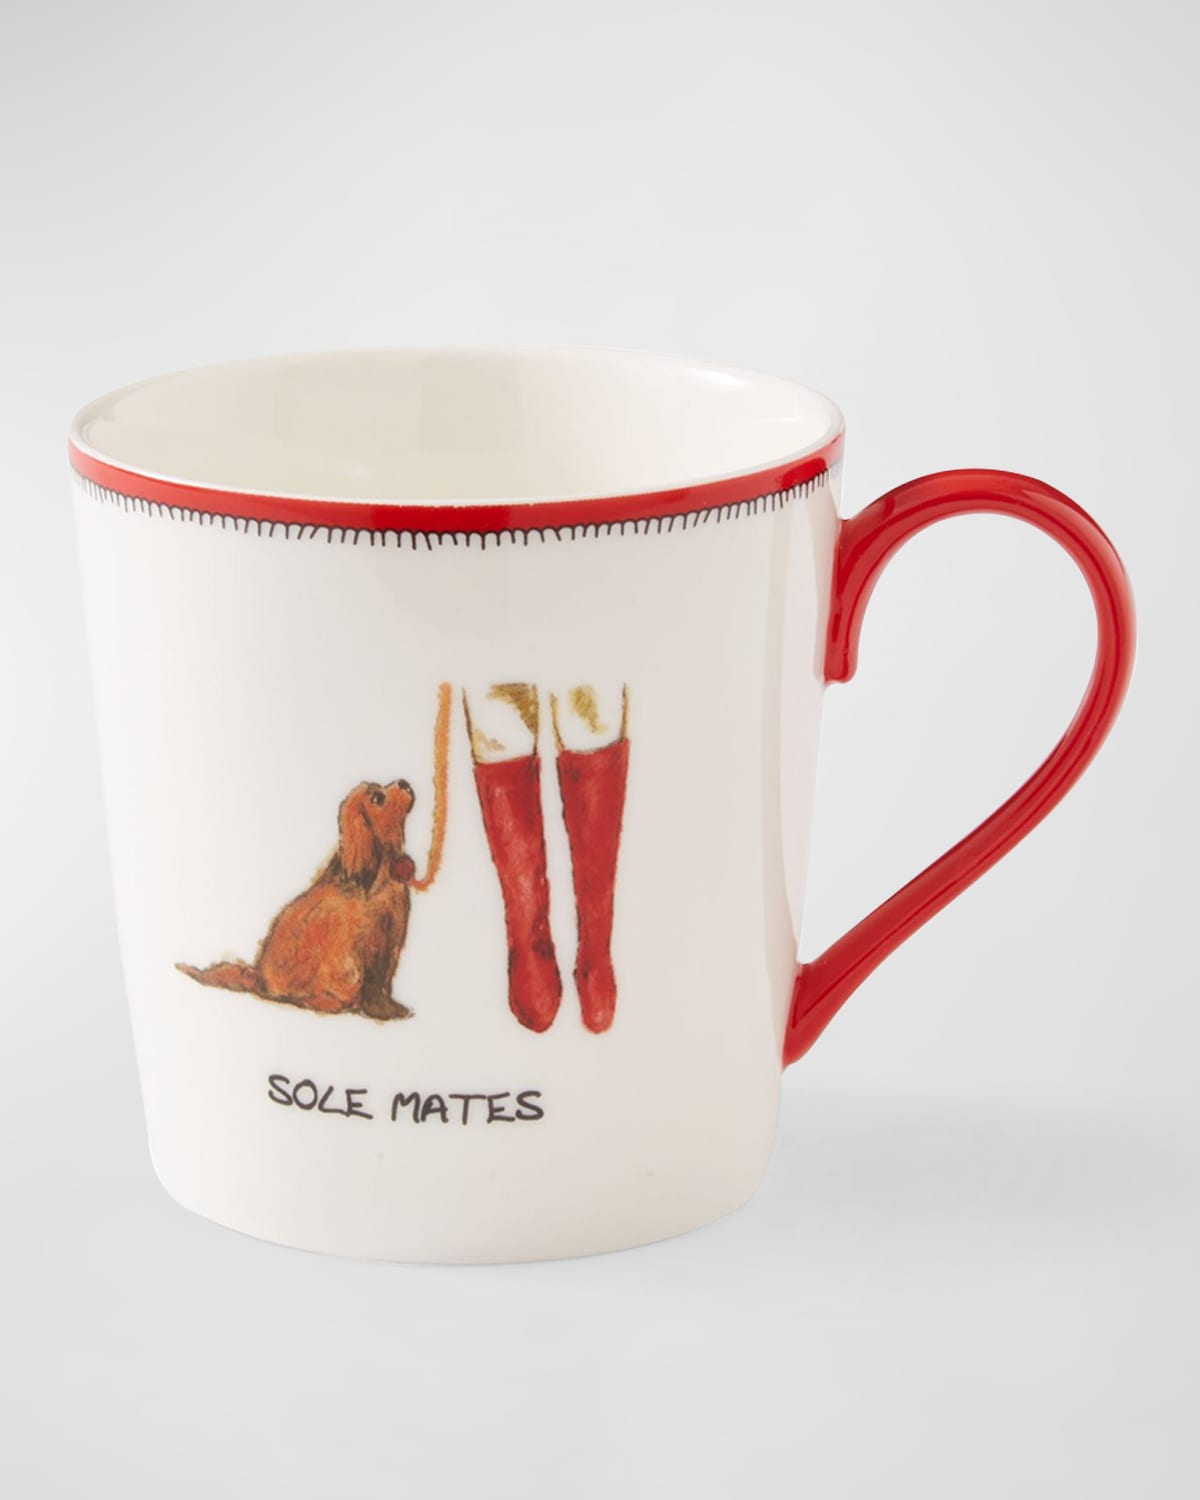 Kit Kemp For Spode Apple A Day Doodle Mug In Sole Mates